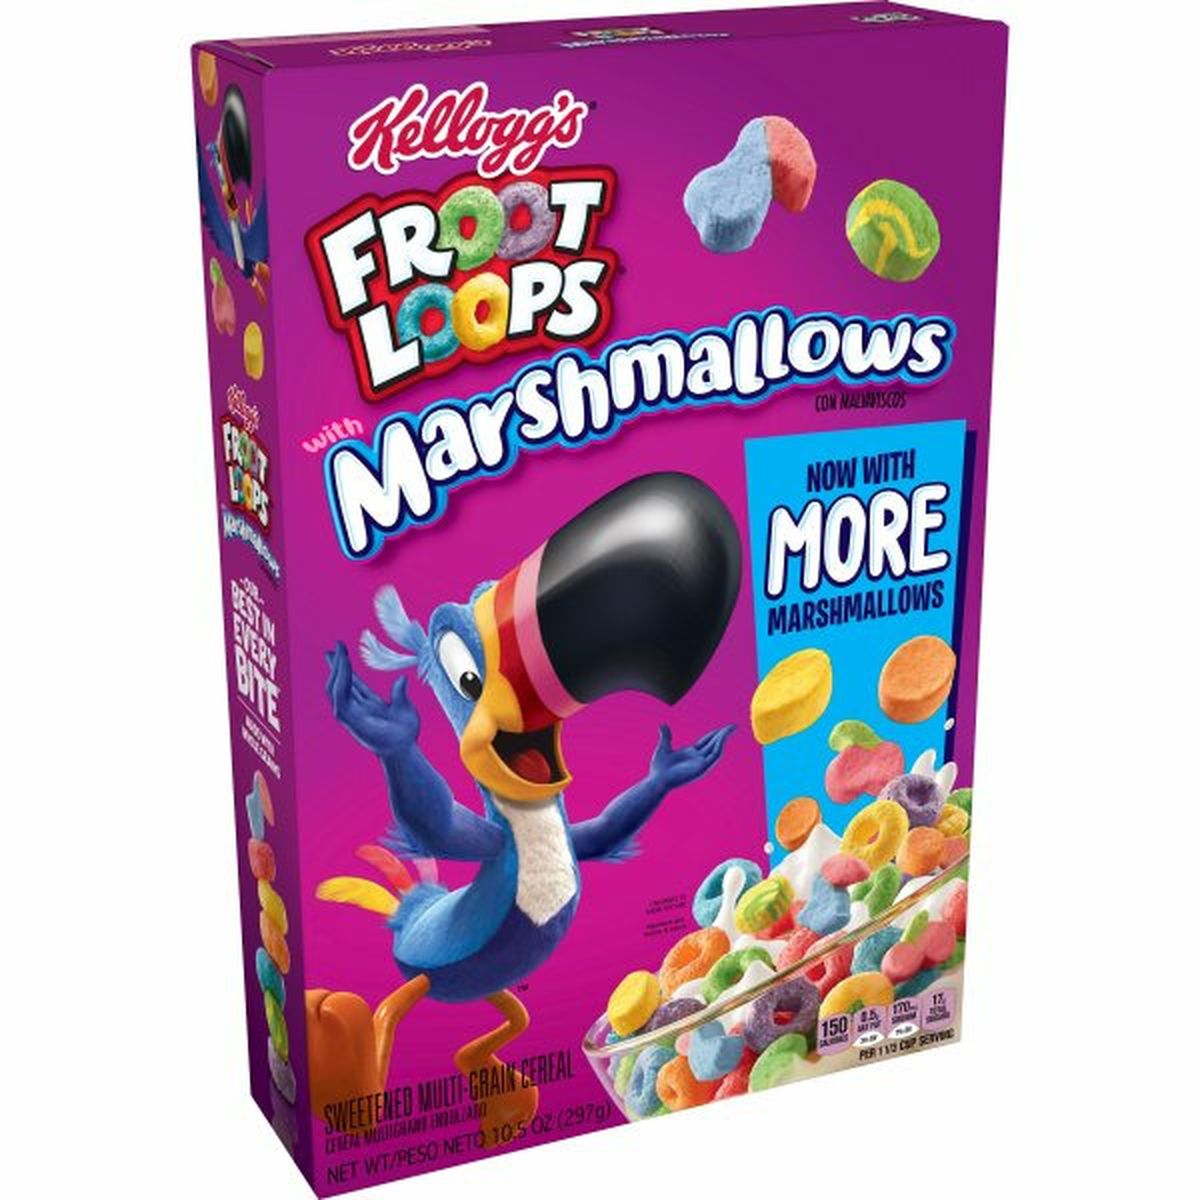 Calories in Kellogg's Froot Loops Cereal Kellogg's Froot Loops Breakfast Cereal, Original with Marshmallows, Low Fat Food, 10.5oz